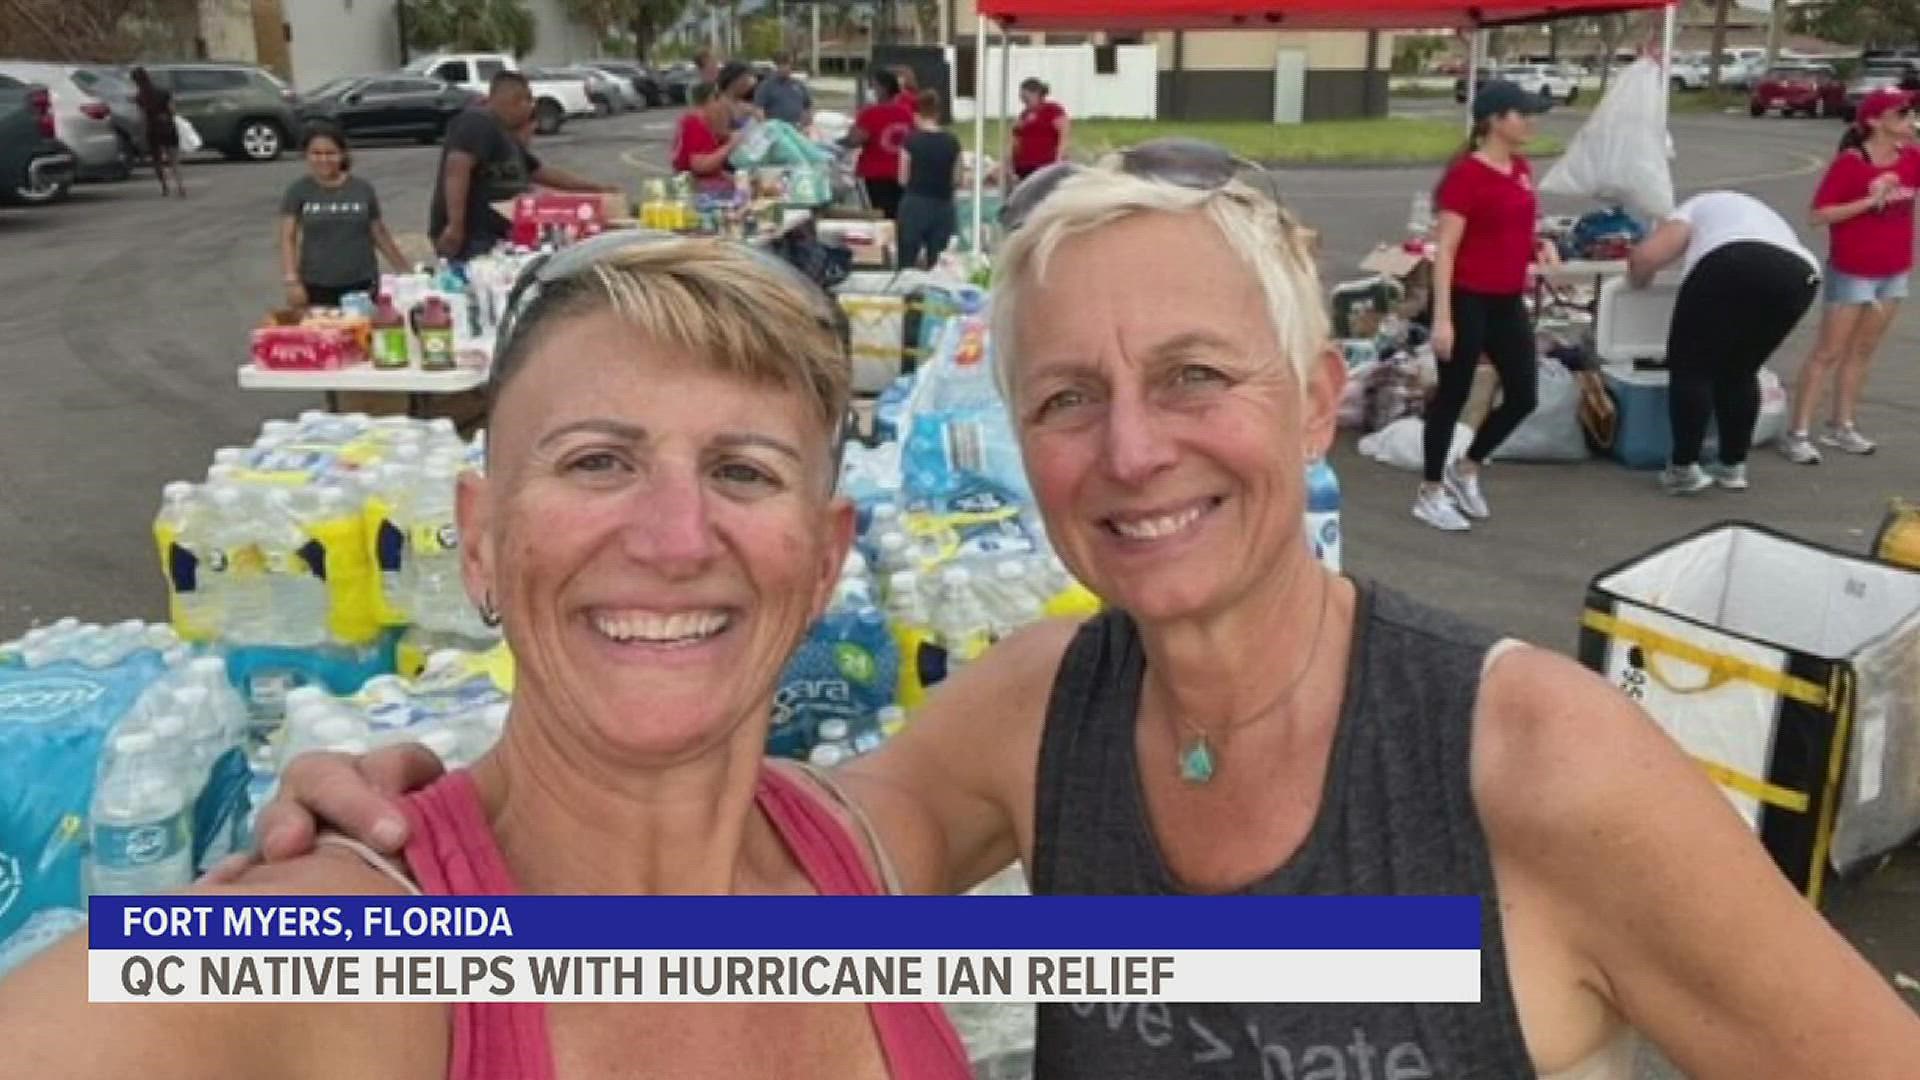 Lili Sheedy and her fiancé drove two hours south from St. Petersburg, Florida to help distribute supplies.